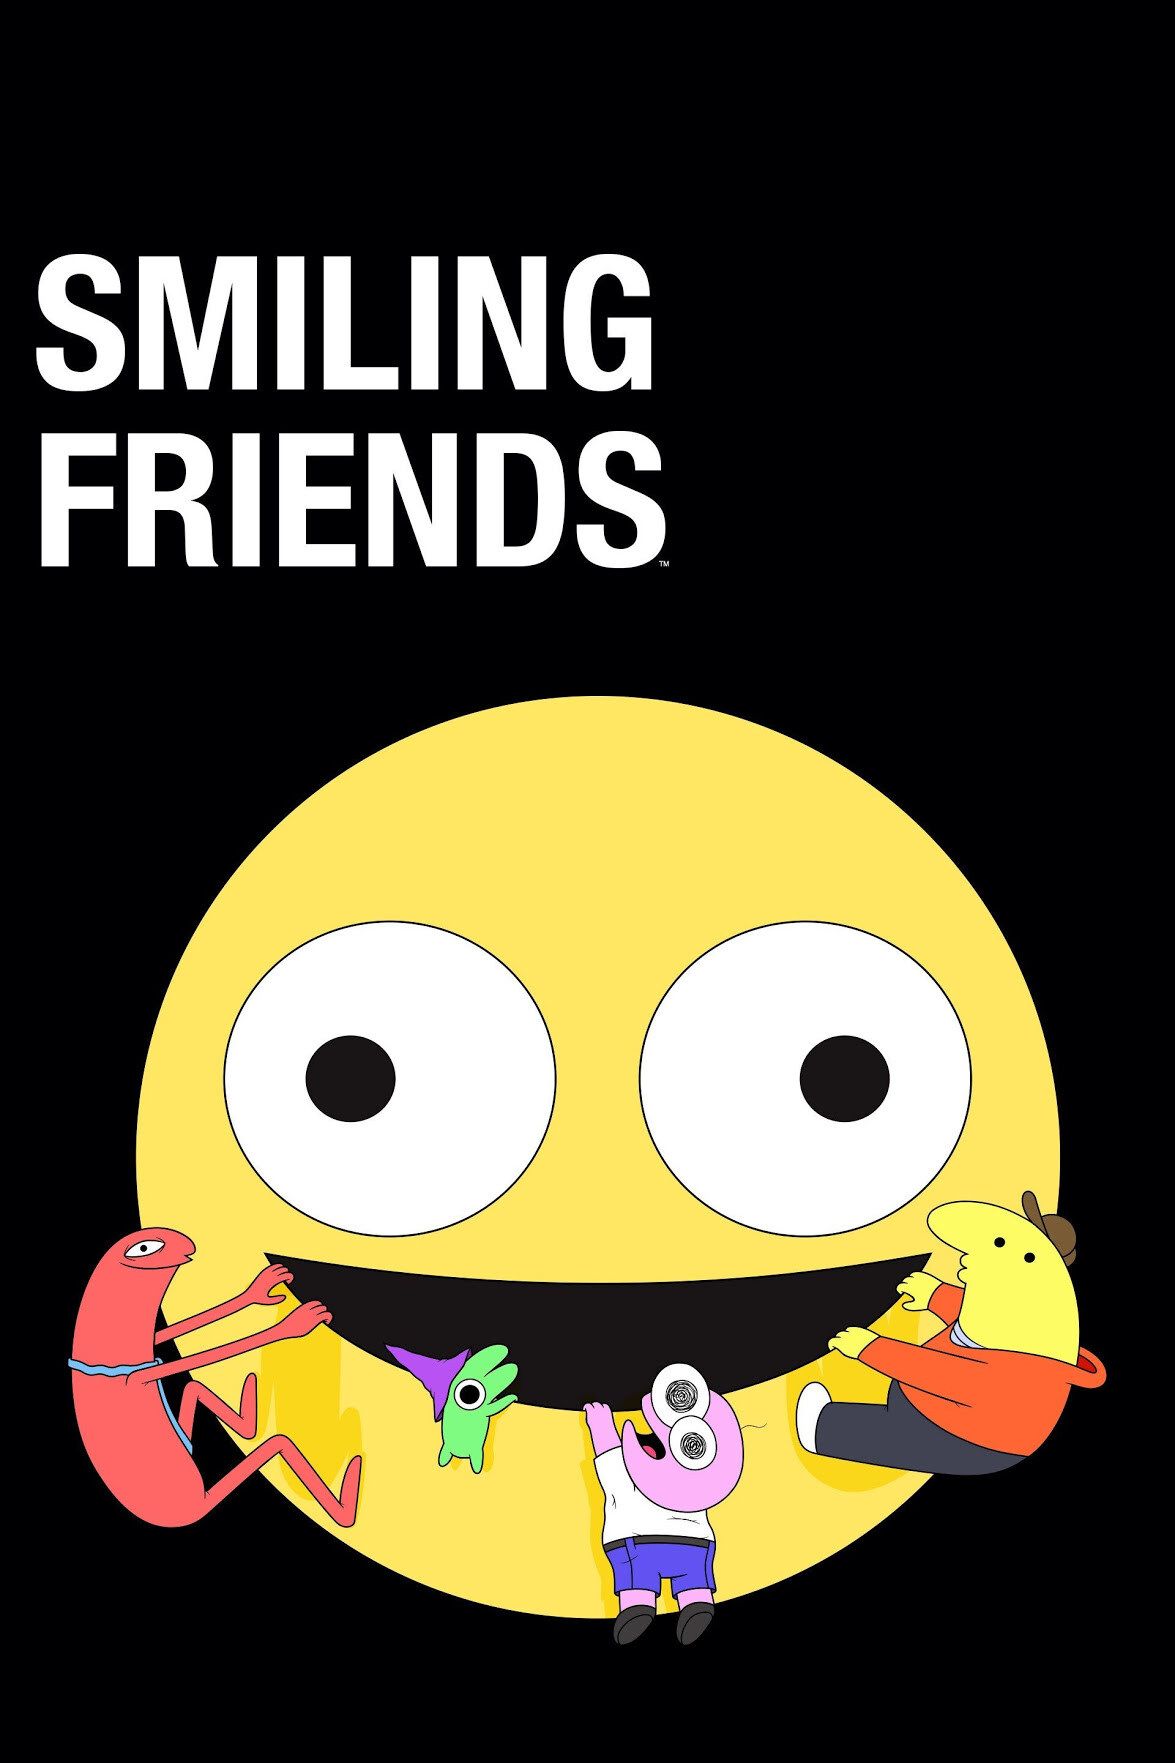 When Does 'Smiling Friends' Season 2 Premiere on Max?